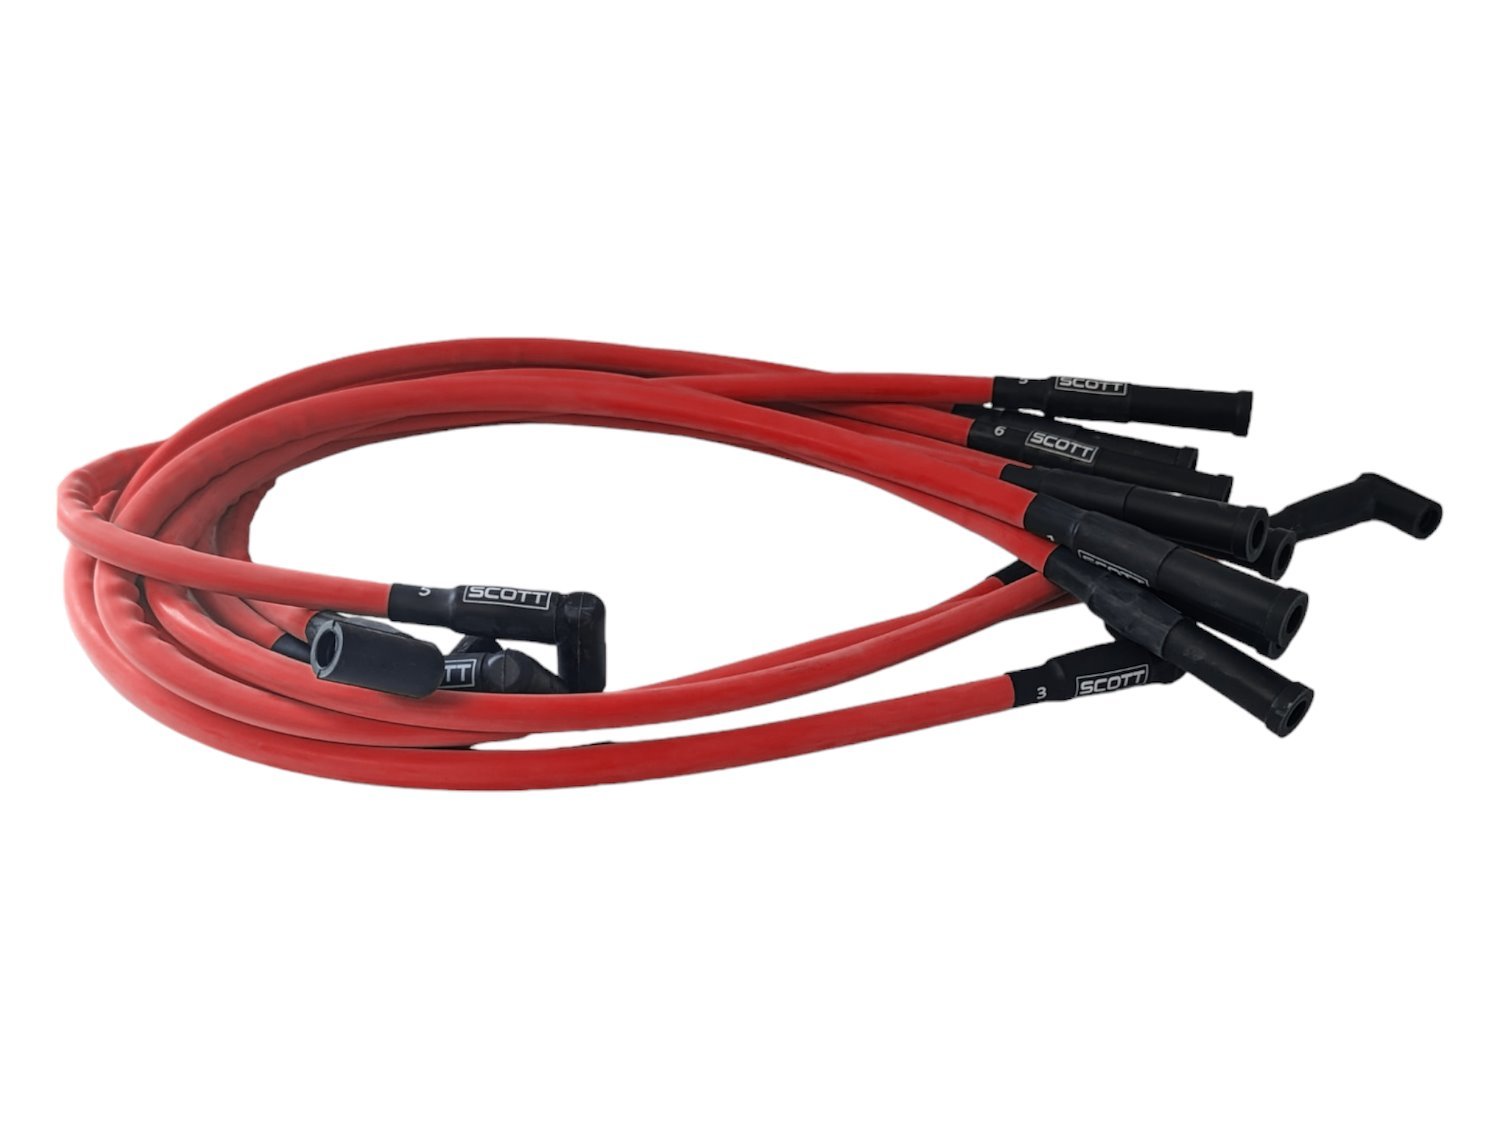 SPW300-CH-428-2 Super Mag Fiberglass-Oversleeved Spark Plug Wire Set for Big Block Ford FE [Red]